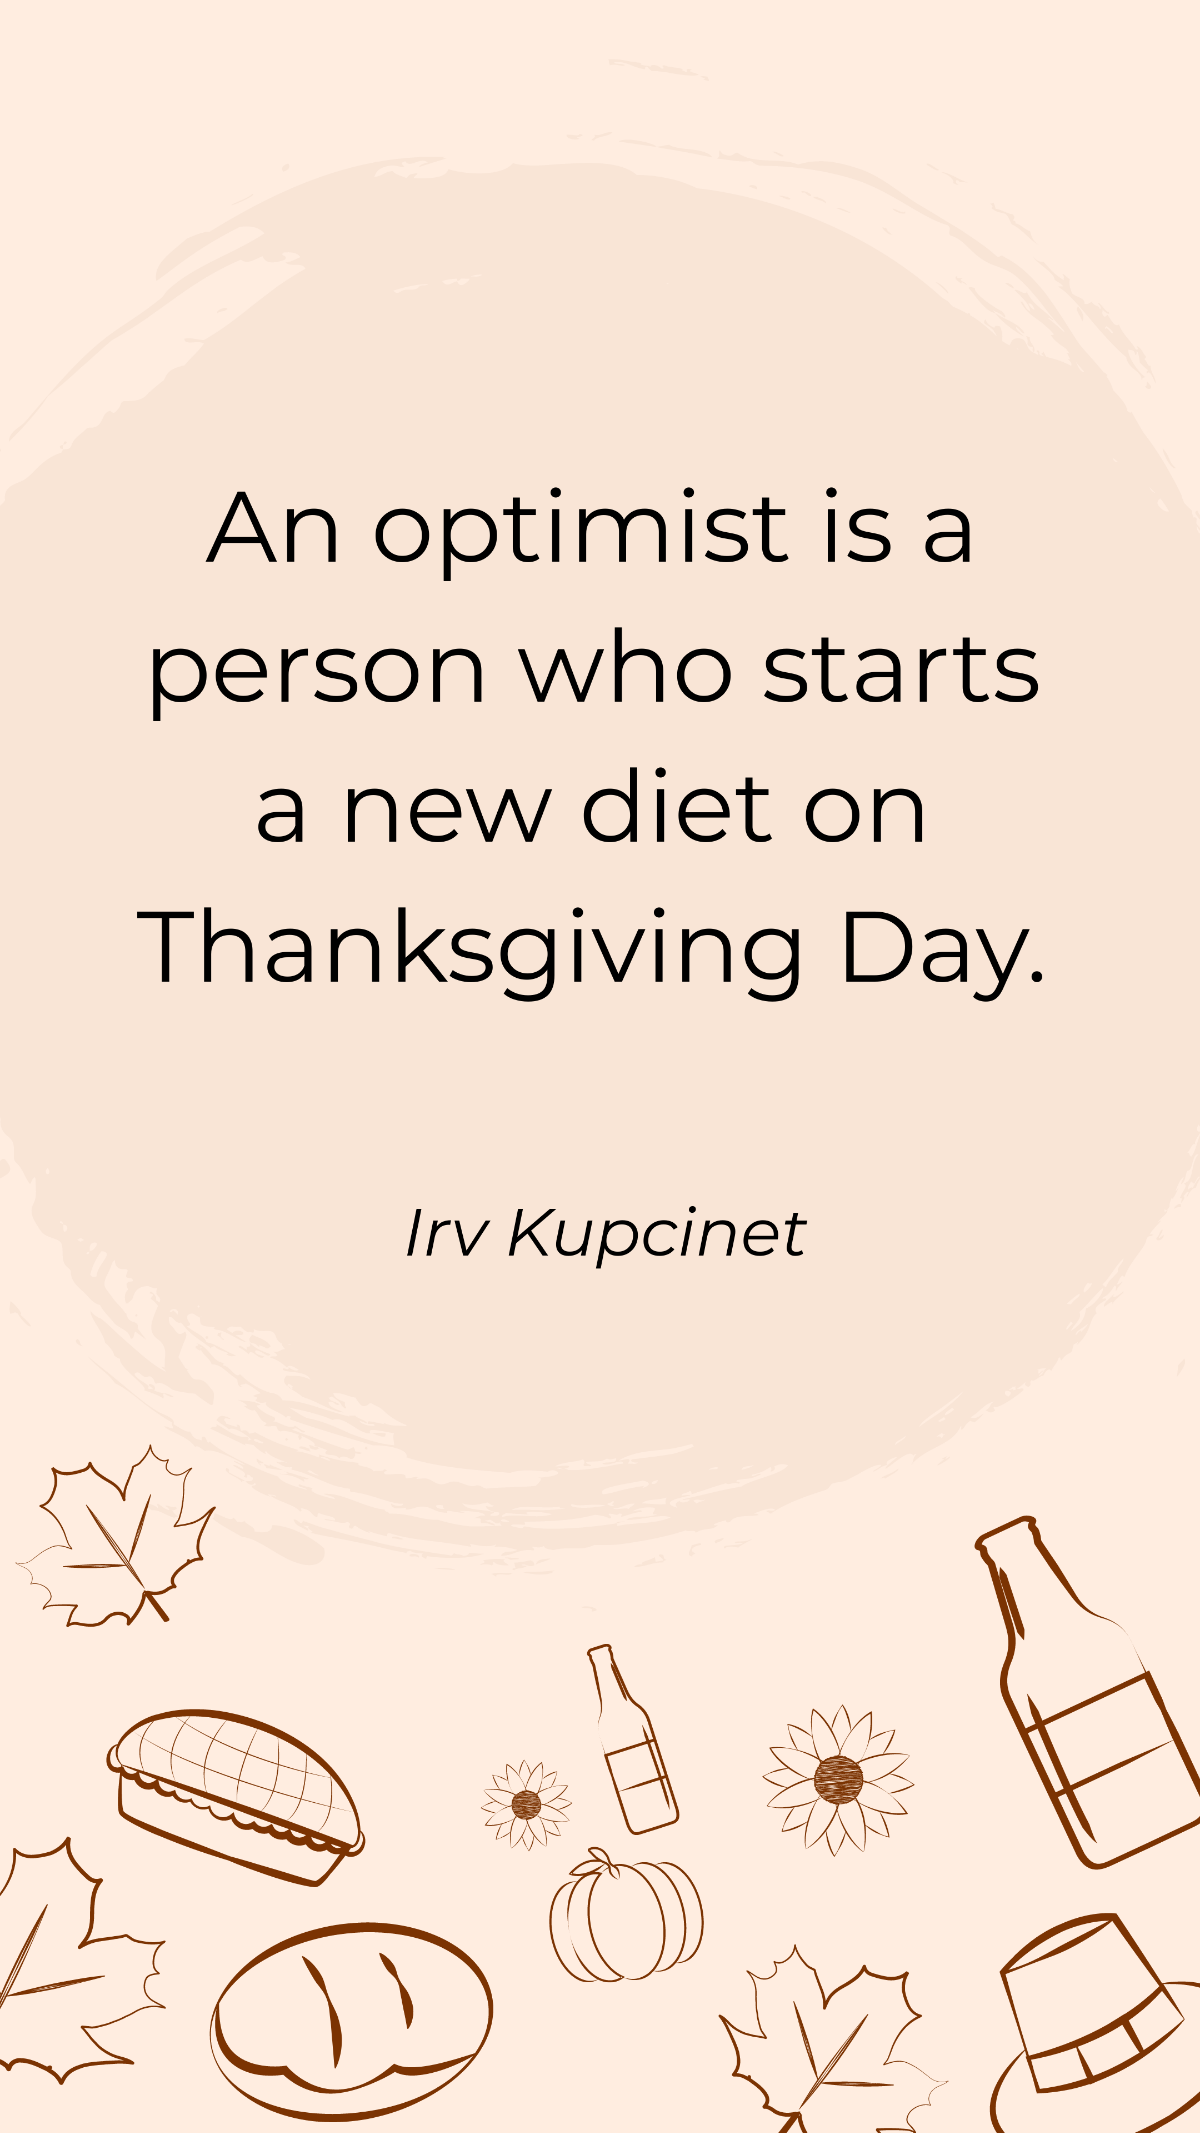 Irv Kupcinet - An optimist is a person who starts a new diet on Thanksgiving Day. Template